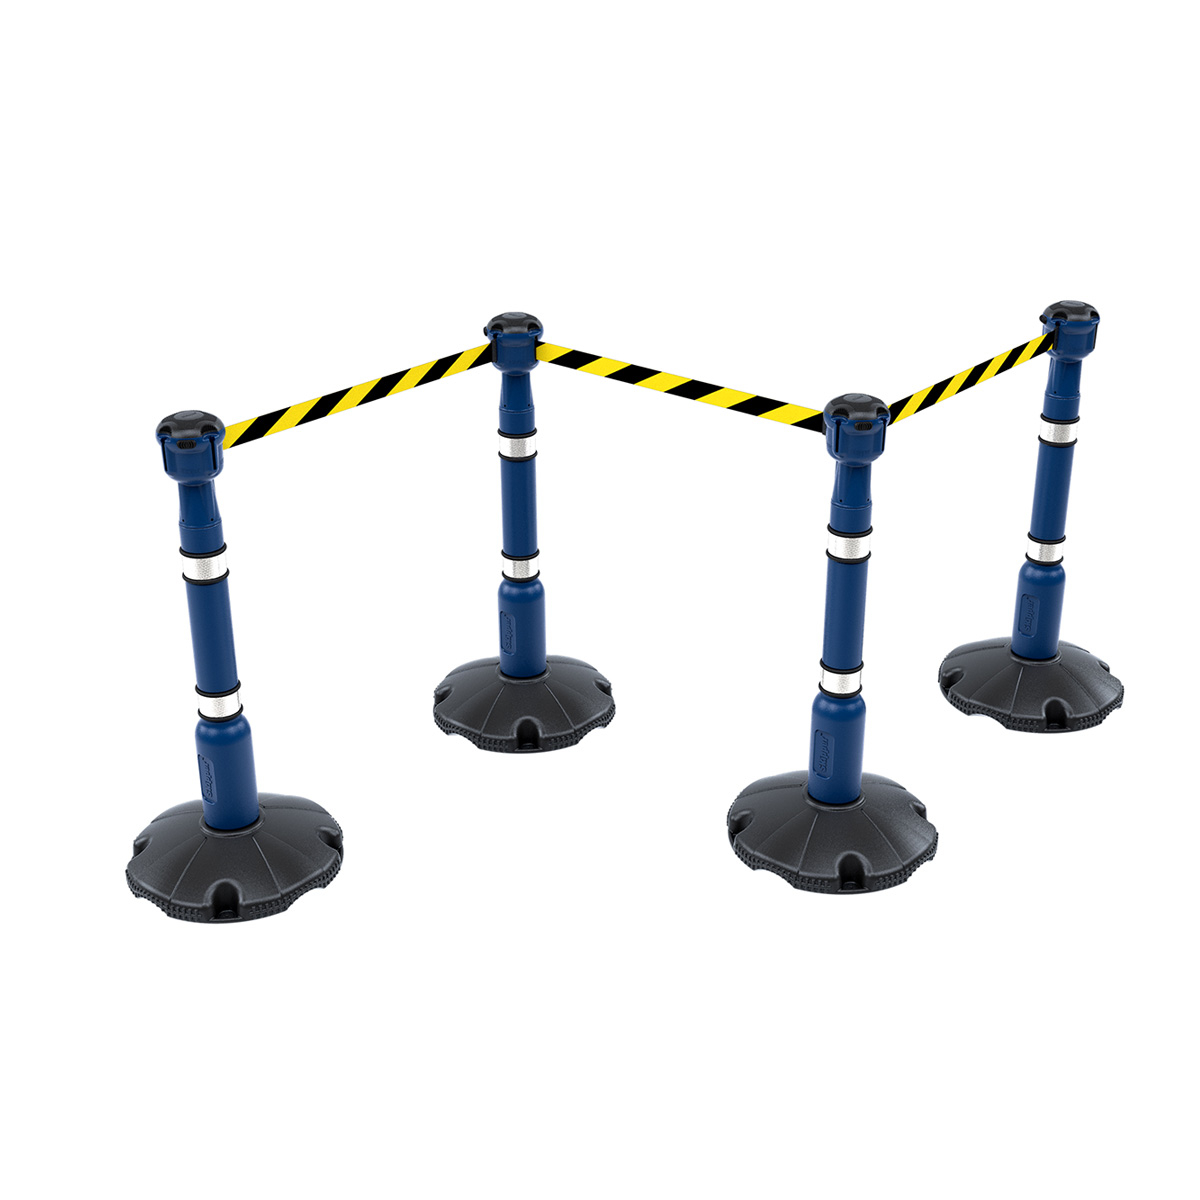 Skipper™ Portable Safety Barrier Kit 27m Can be Used To Cordon Off Dangerous Work Zones